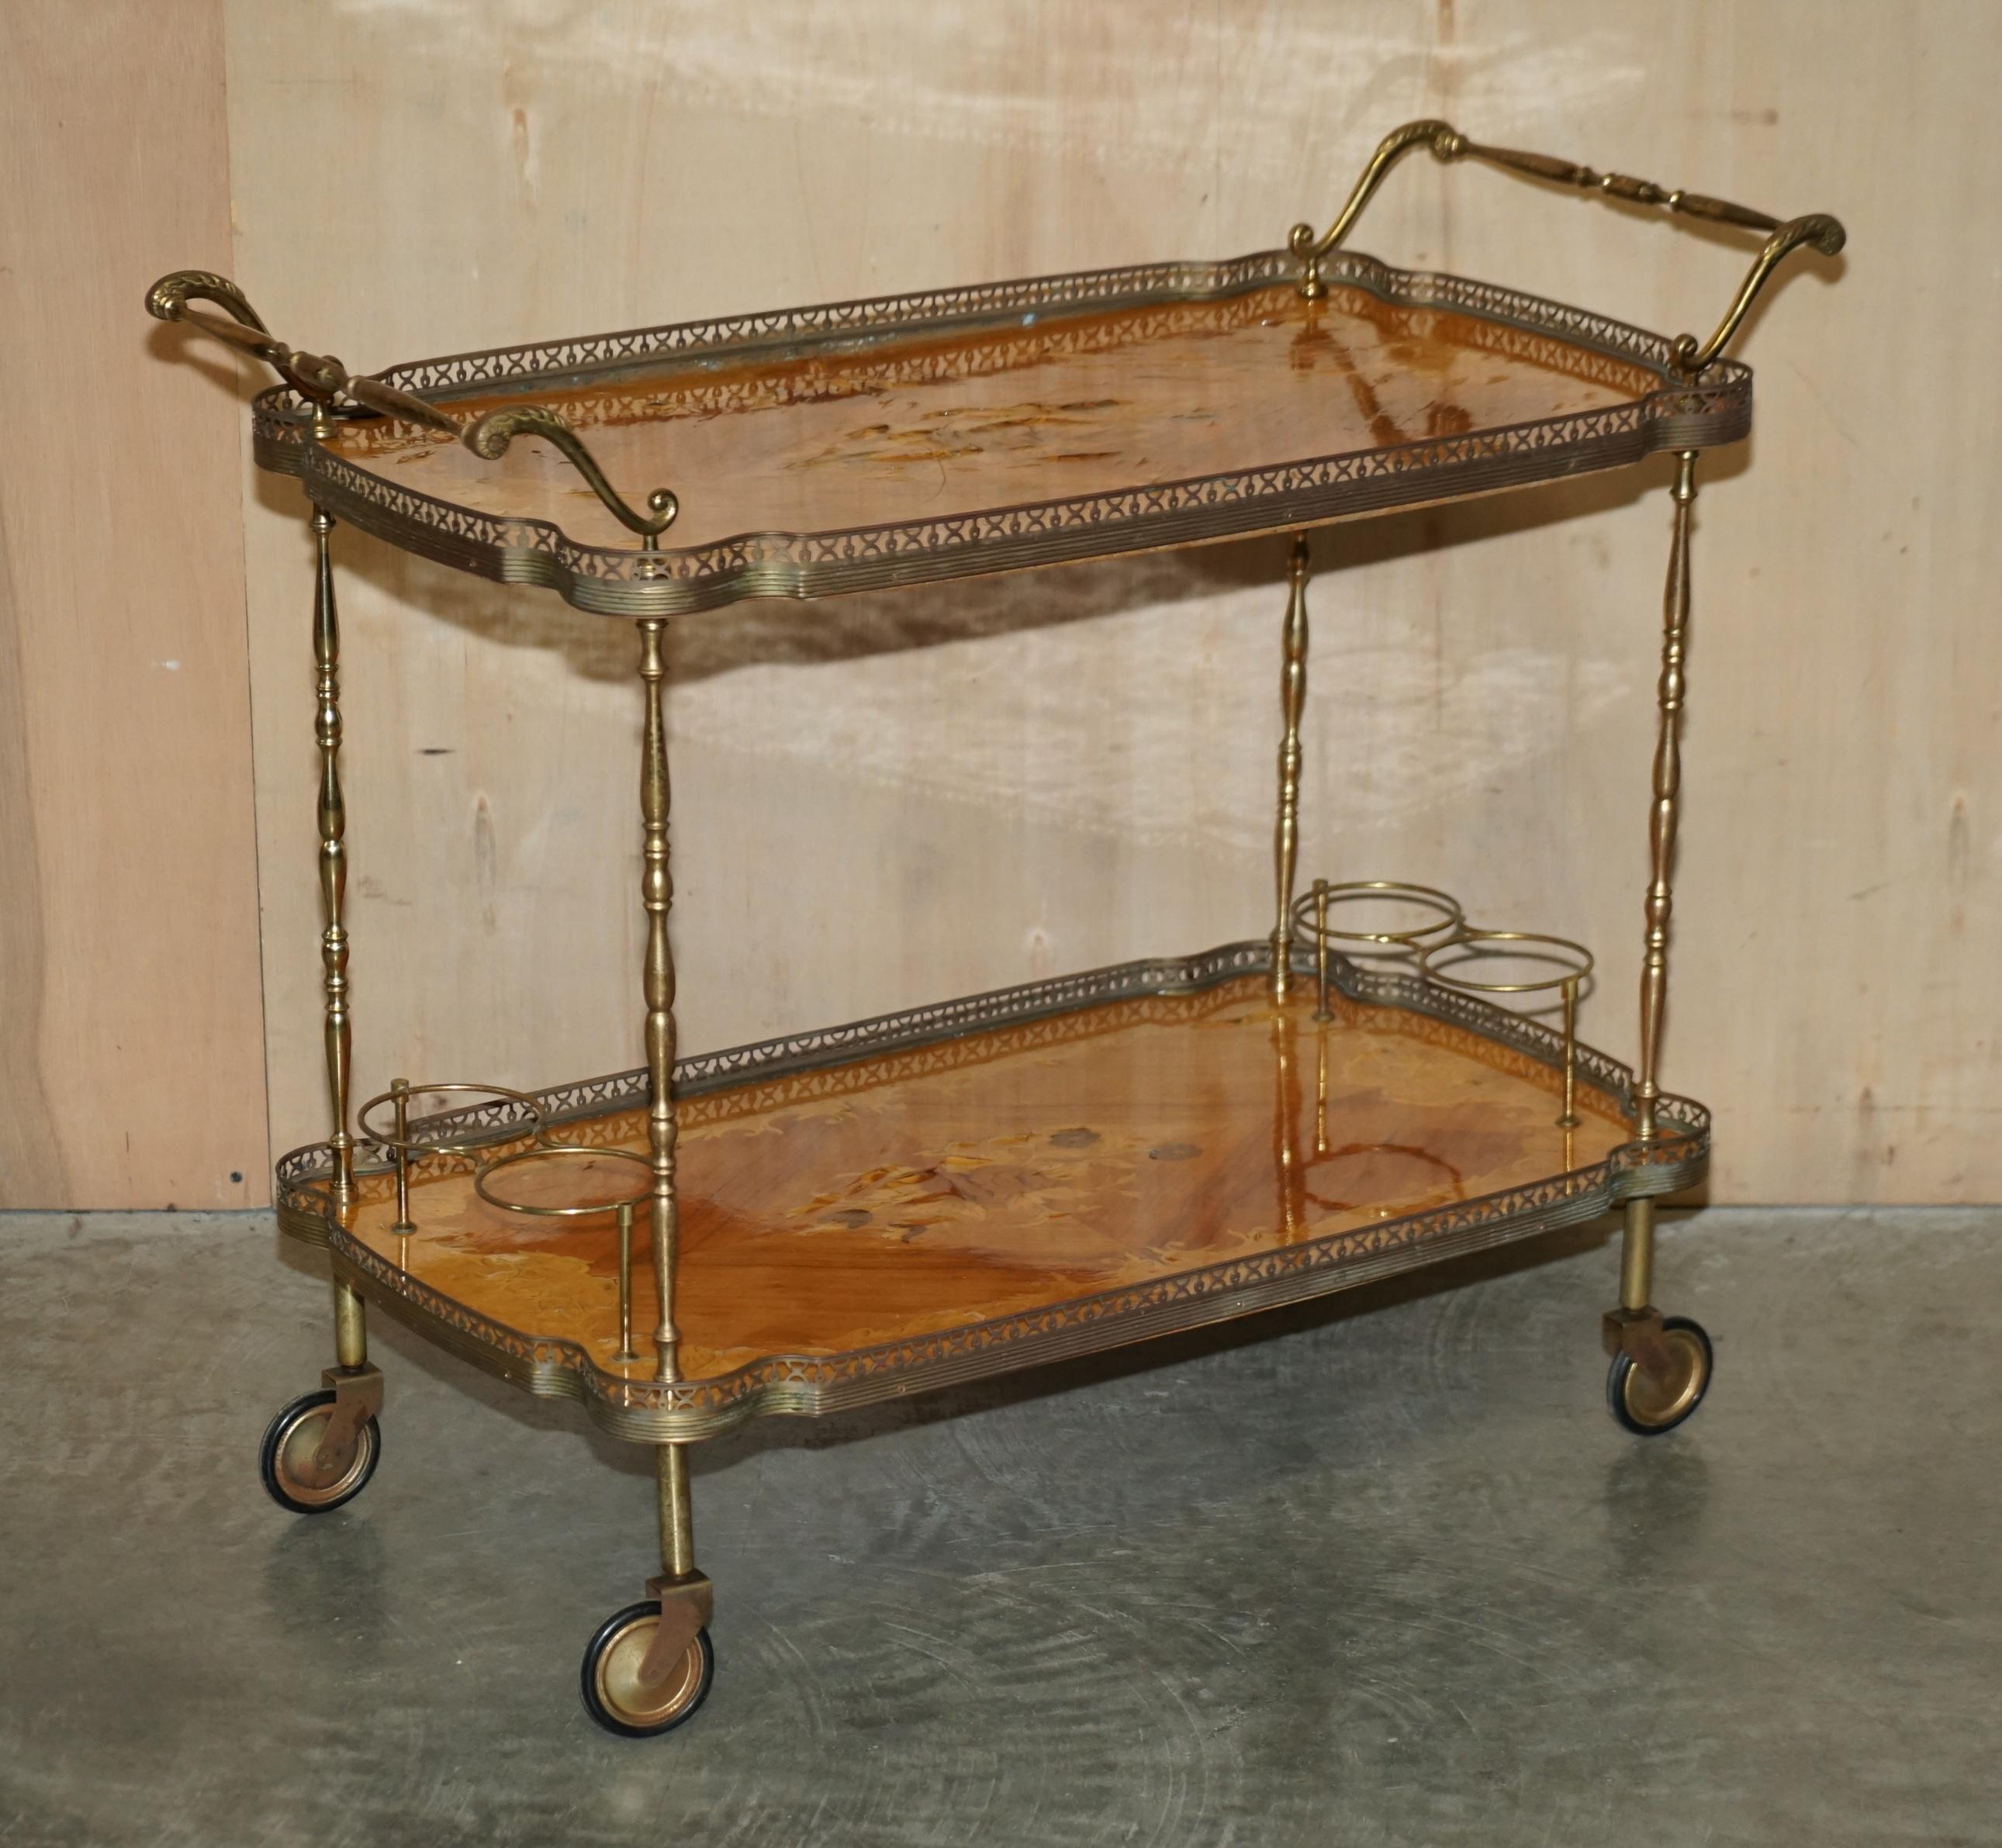 Royal House Antiques

Royal House Antiques is delighted to offer for sale this Mid Century Modern Italian brass and laminate inlaid drinks serving trolley 

Please note the delivery fee listed is just a guide, it covers within the M25 only for the